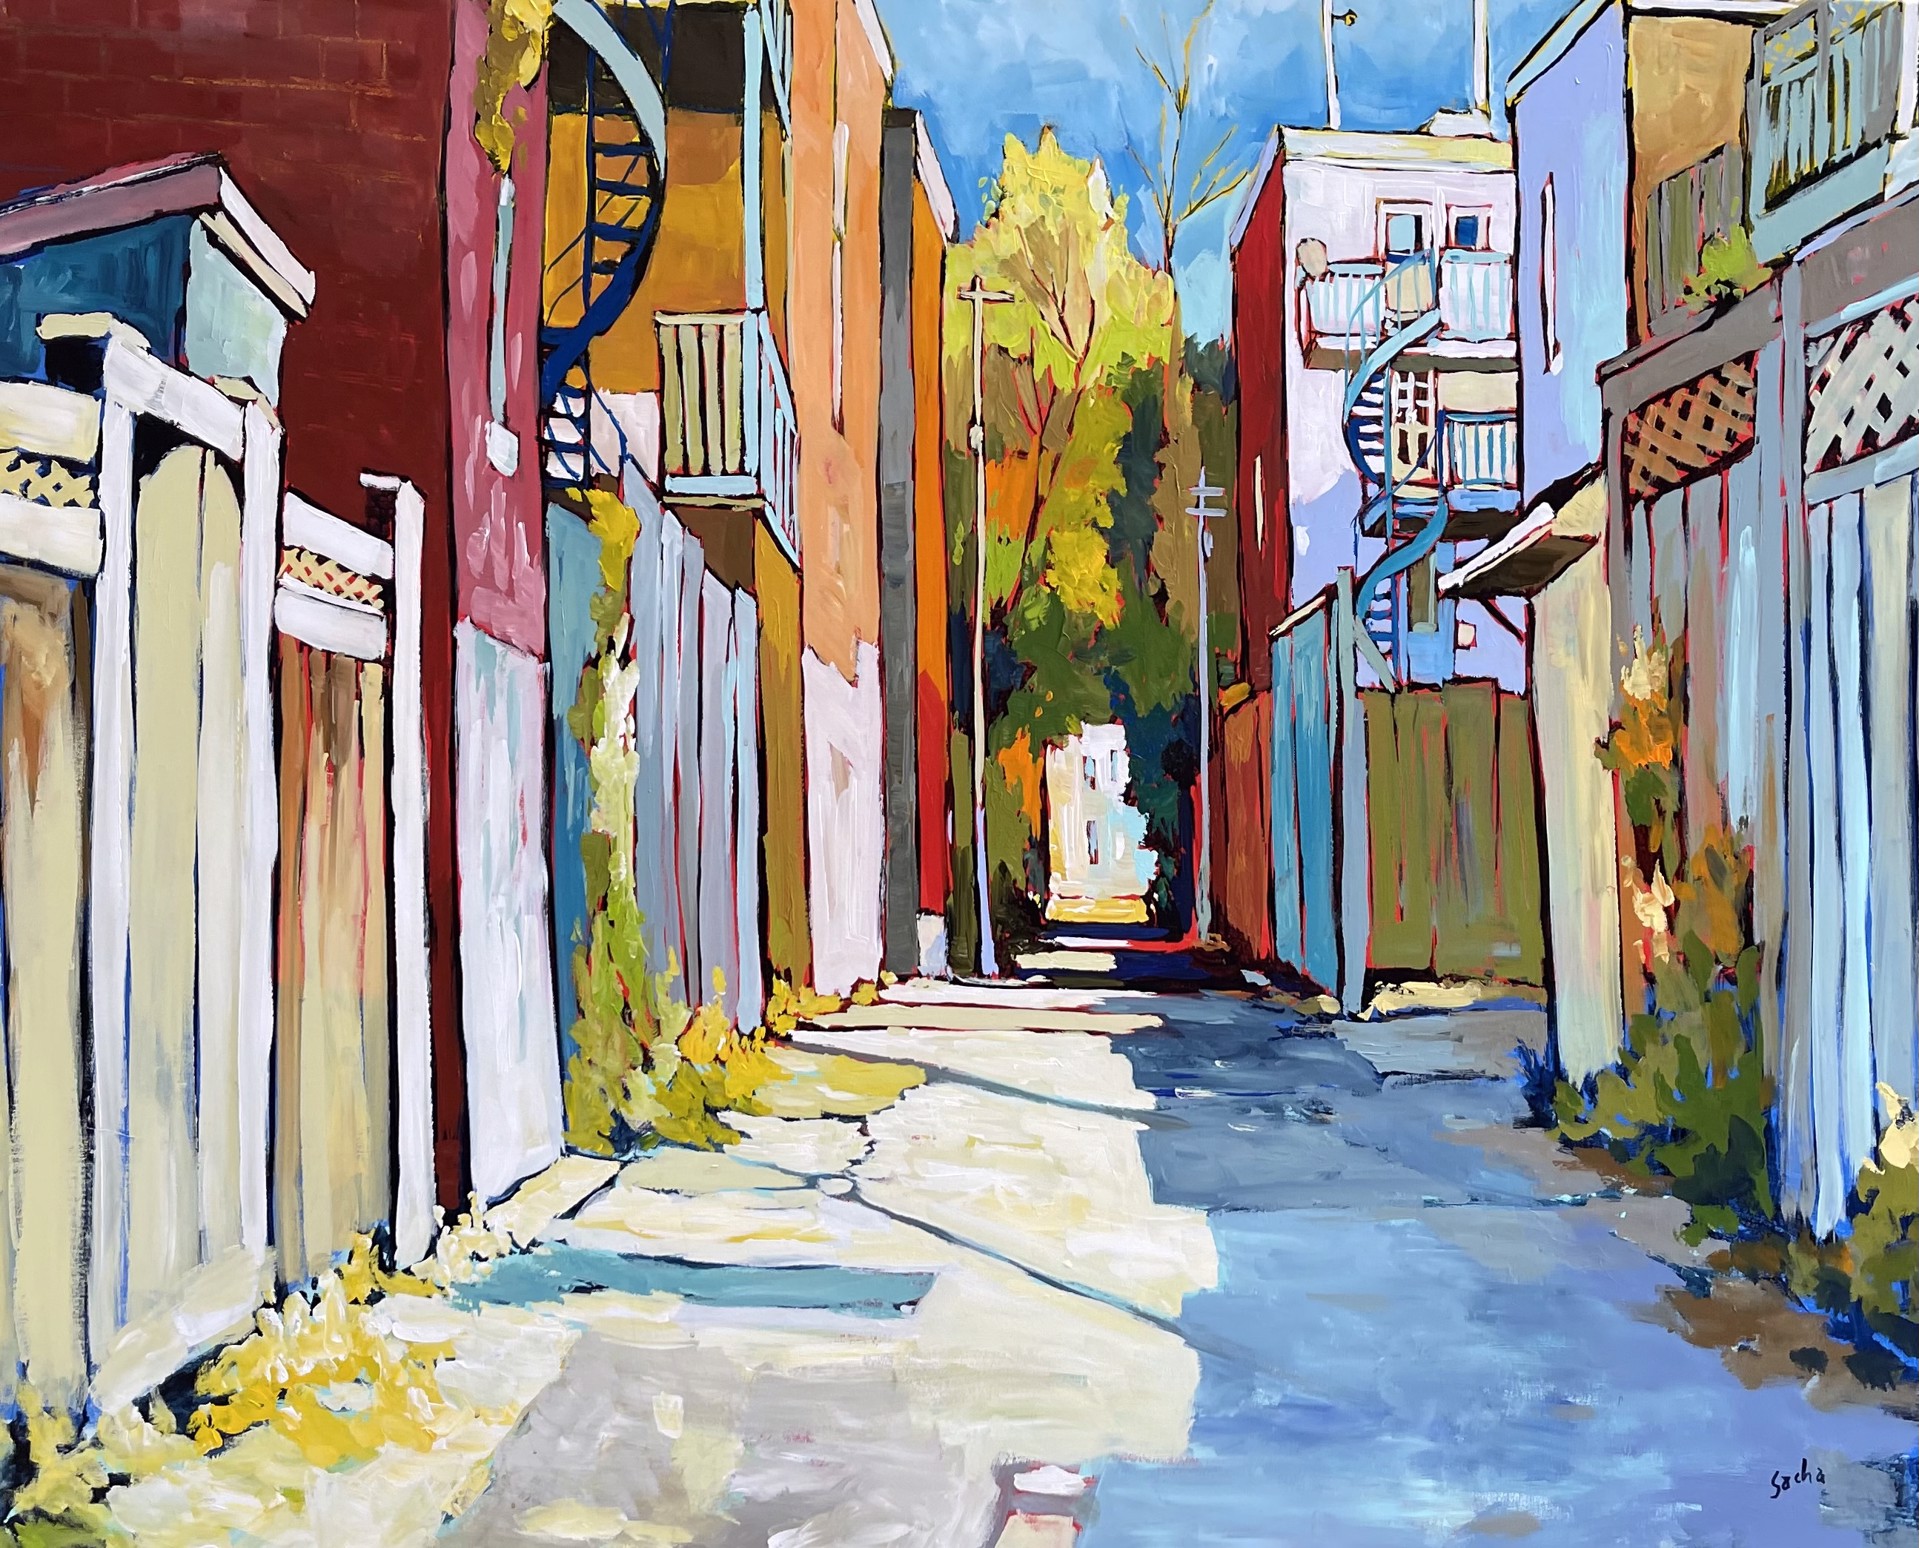 Happy Morning Alley 6124612 by Sacha Barrette